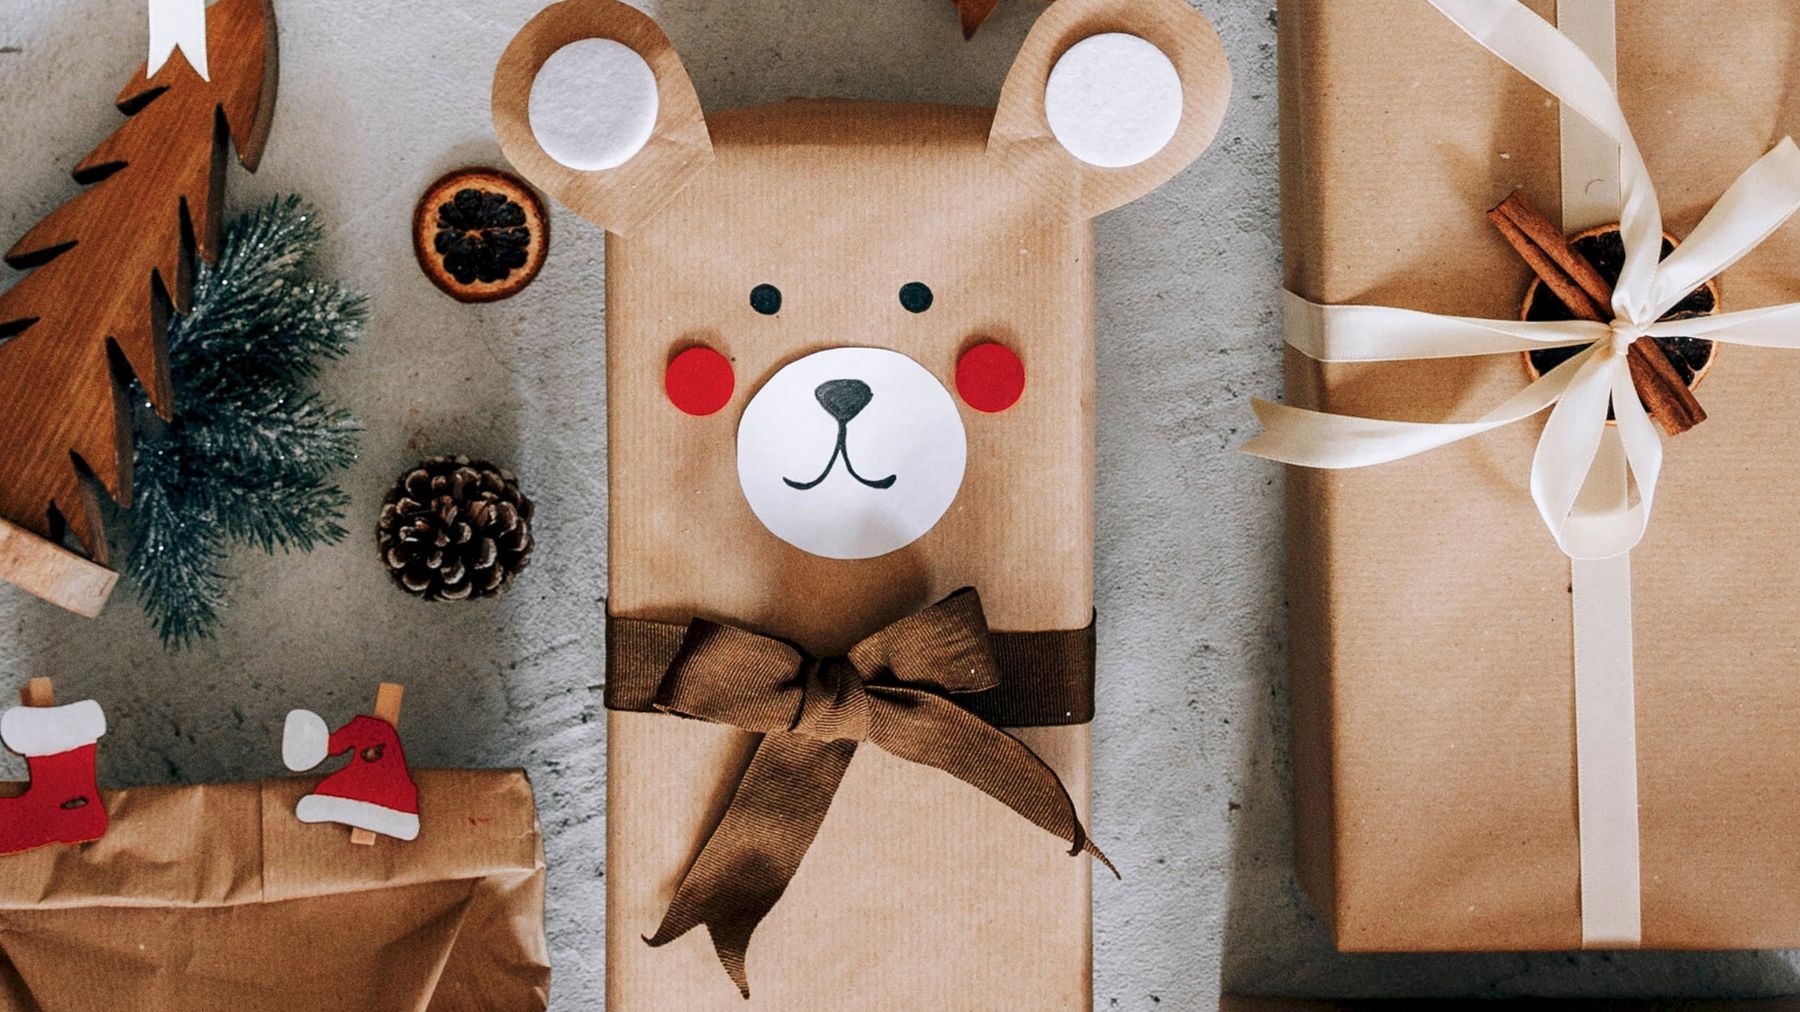 Wrap Christmas gifts with eco-friendly materials